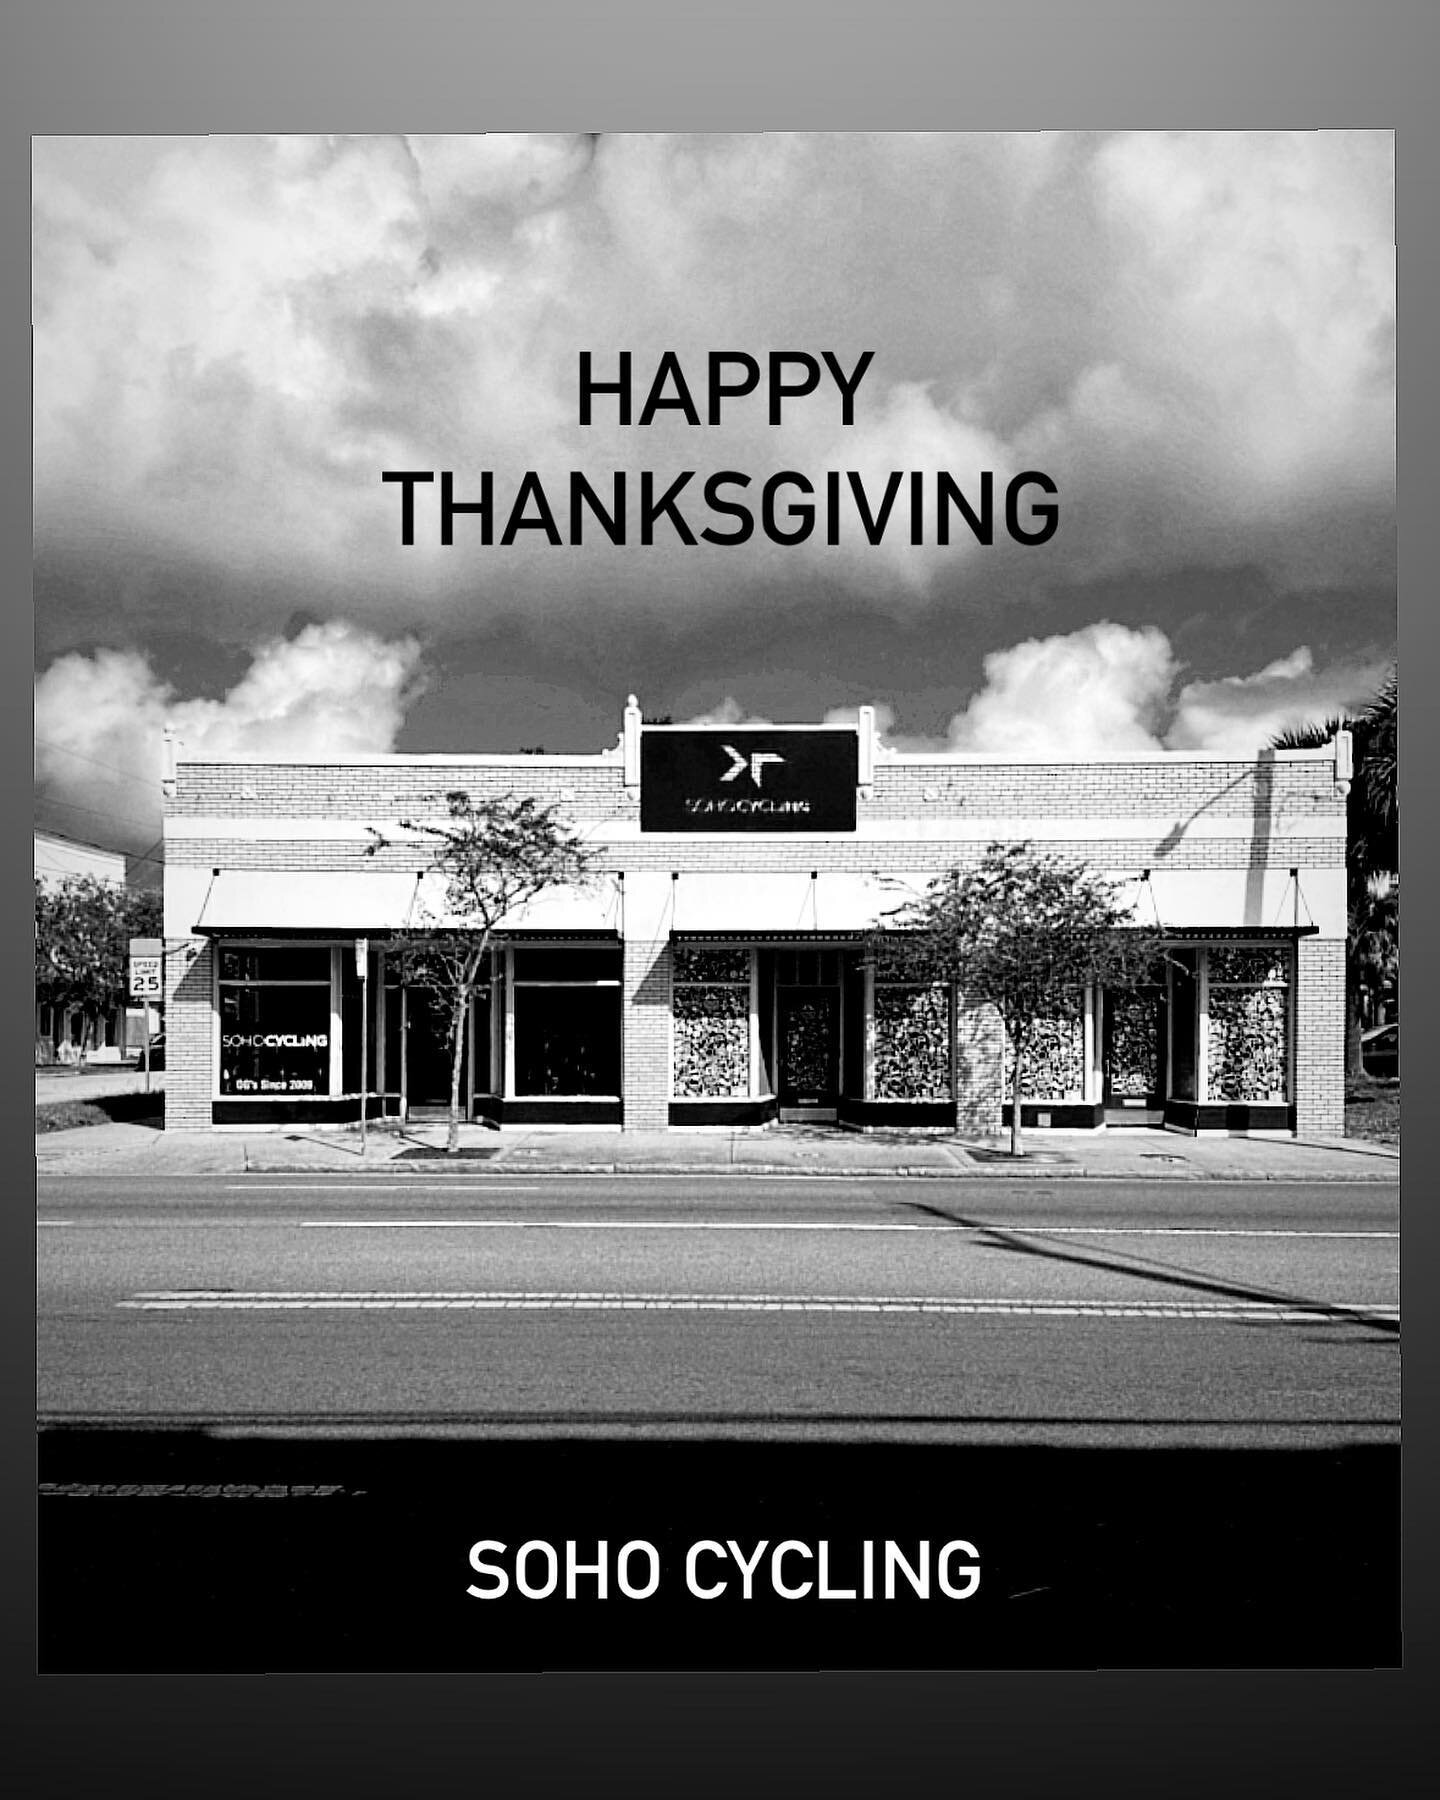 Happiest of Thanksgivings to you and your families! Wishing you a day full of good food, family and friends! 
Love,
Your Soho Fam🧡🦃🤎&hellip;
&hellip;
#thanksgiving #turkeyday #family #love #enjoy #holiday